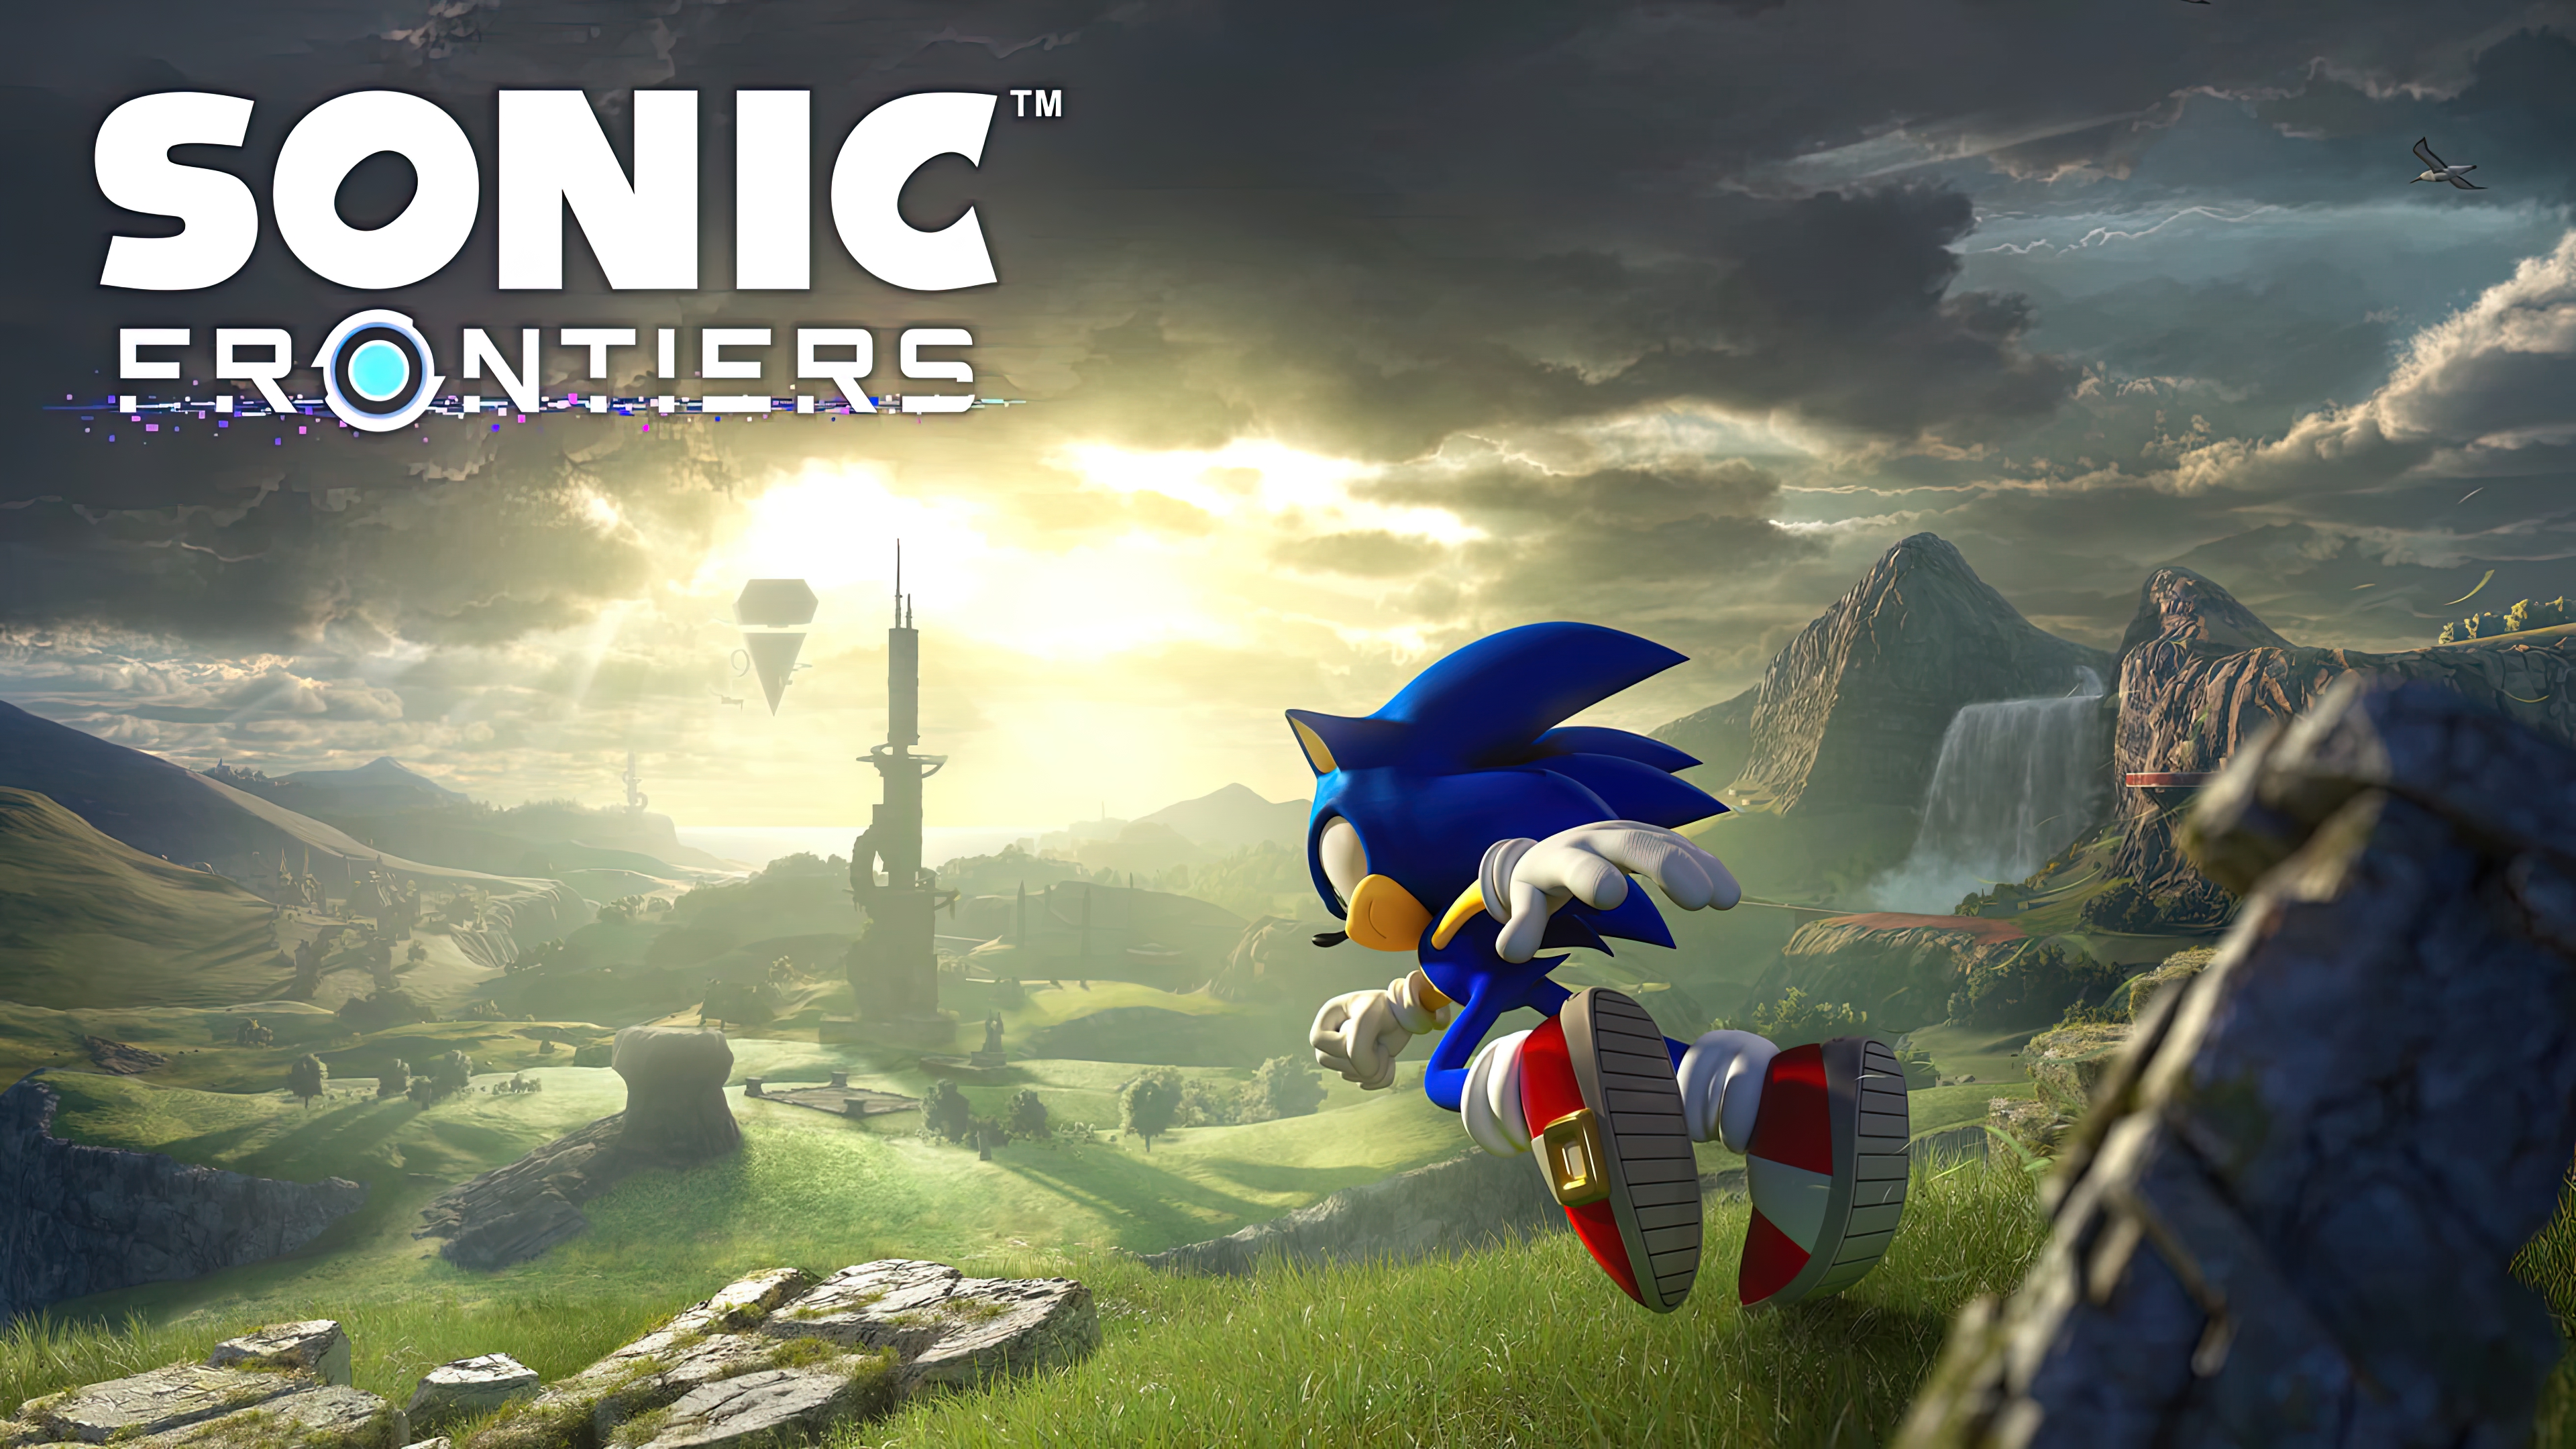 Sonic Sonic The Hedgehog Sonic Frontiers Tower Sega Video Game Art Video Game Characters PC Gaming V 3840x2160